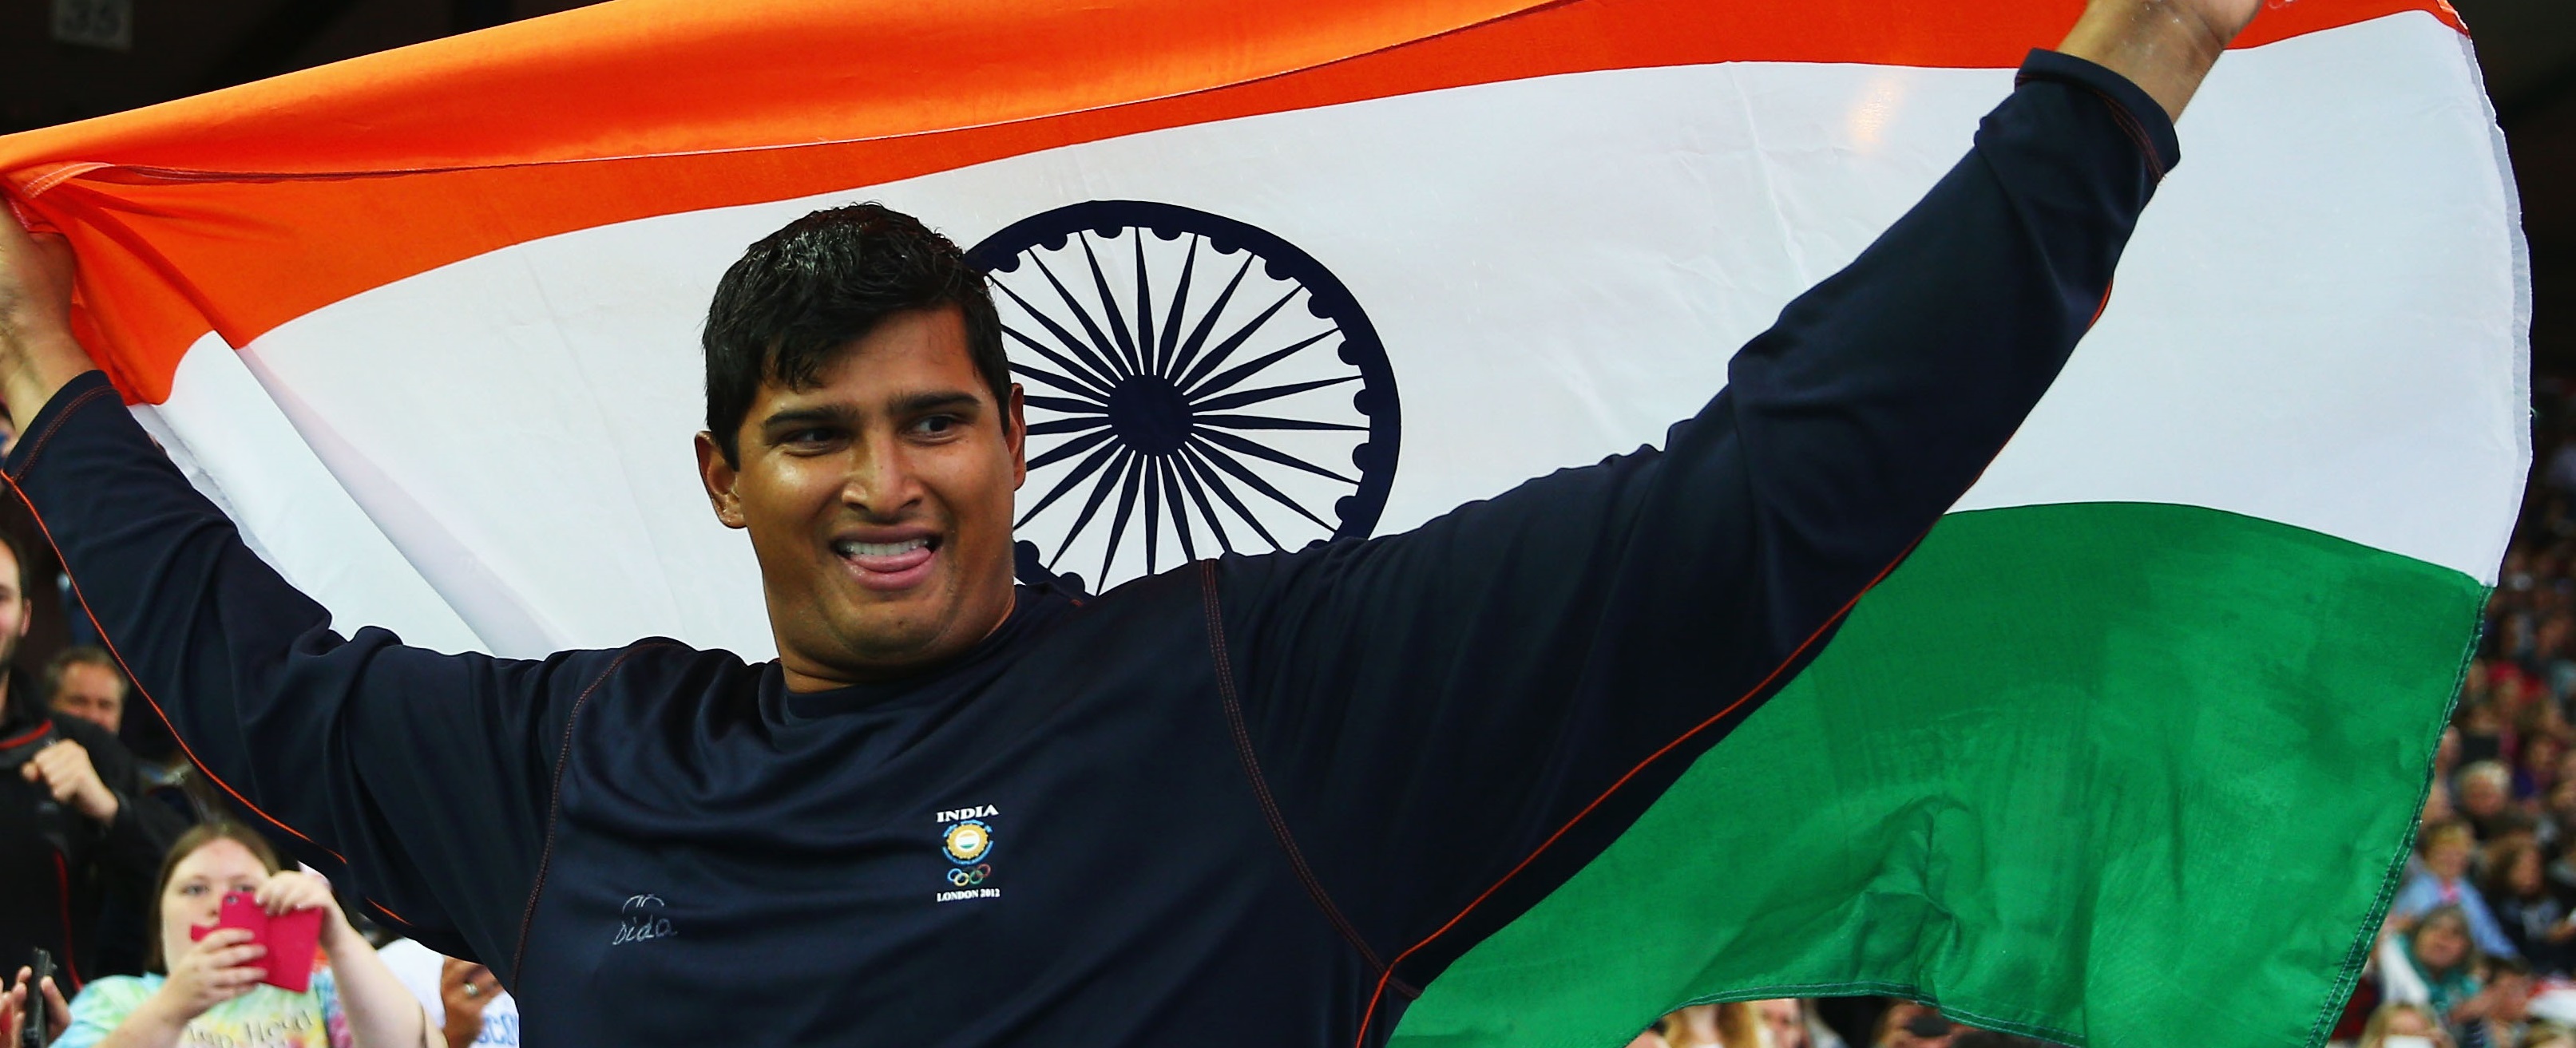 Vikas Gowda: I want to compete a little less in run-up to Rio Olympics